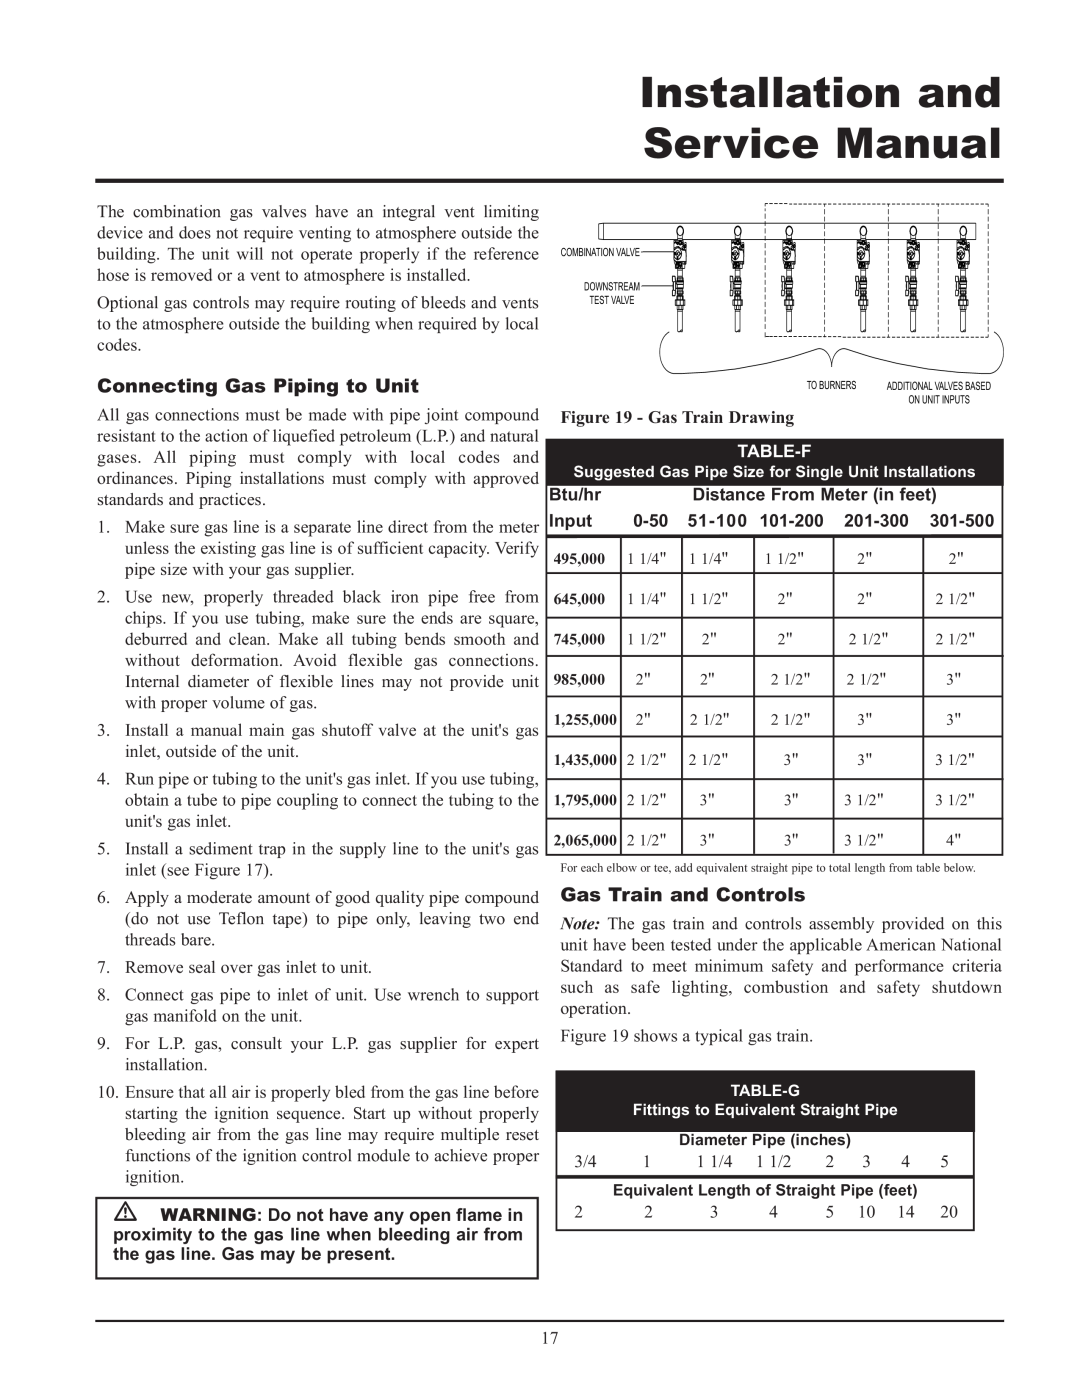 Lochinvar 000 - 2, 495, 065 service manual Connecting Gas Piping to Unit, Gas Train and Controls, Table-F 